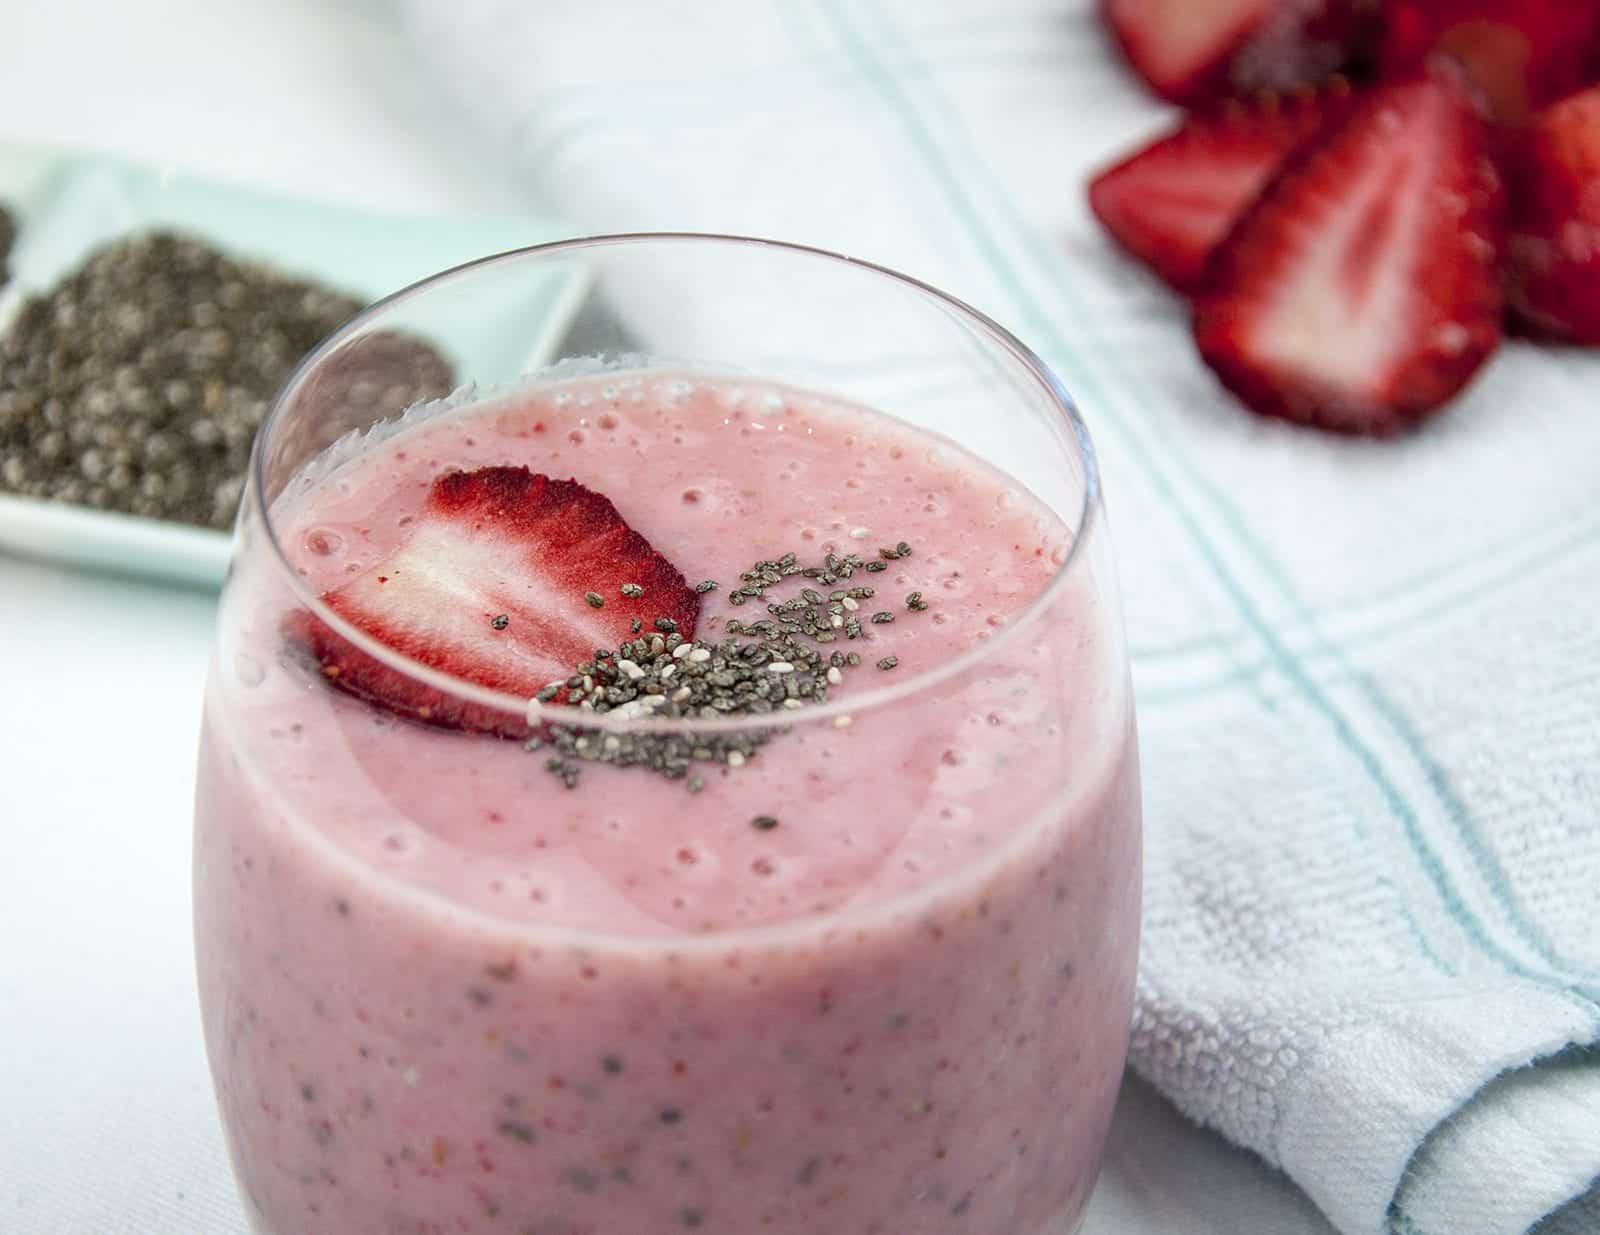 Strawberry and chia seed smoothie. Nutritious, healthy, low-calorie and cholesterol free. This vegan friendly smoothie has it all. A great start to the day!! | theyumyumclub.com